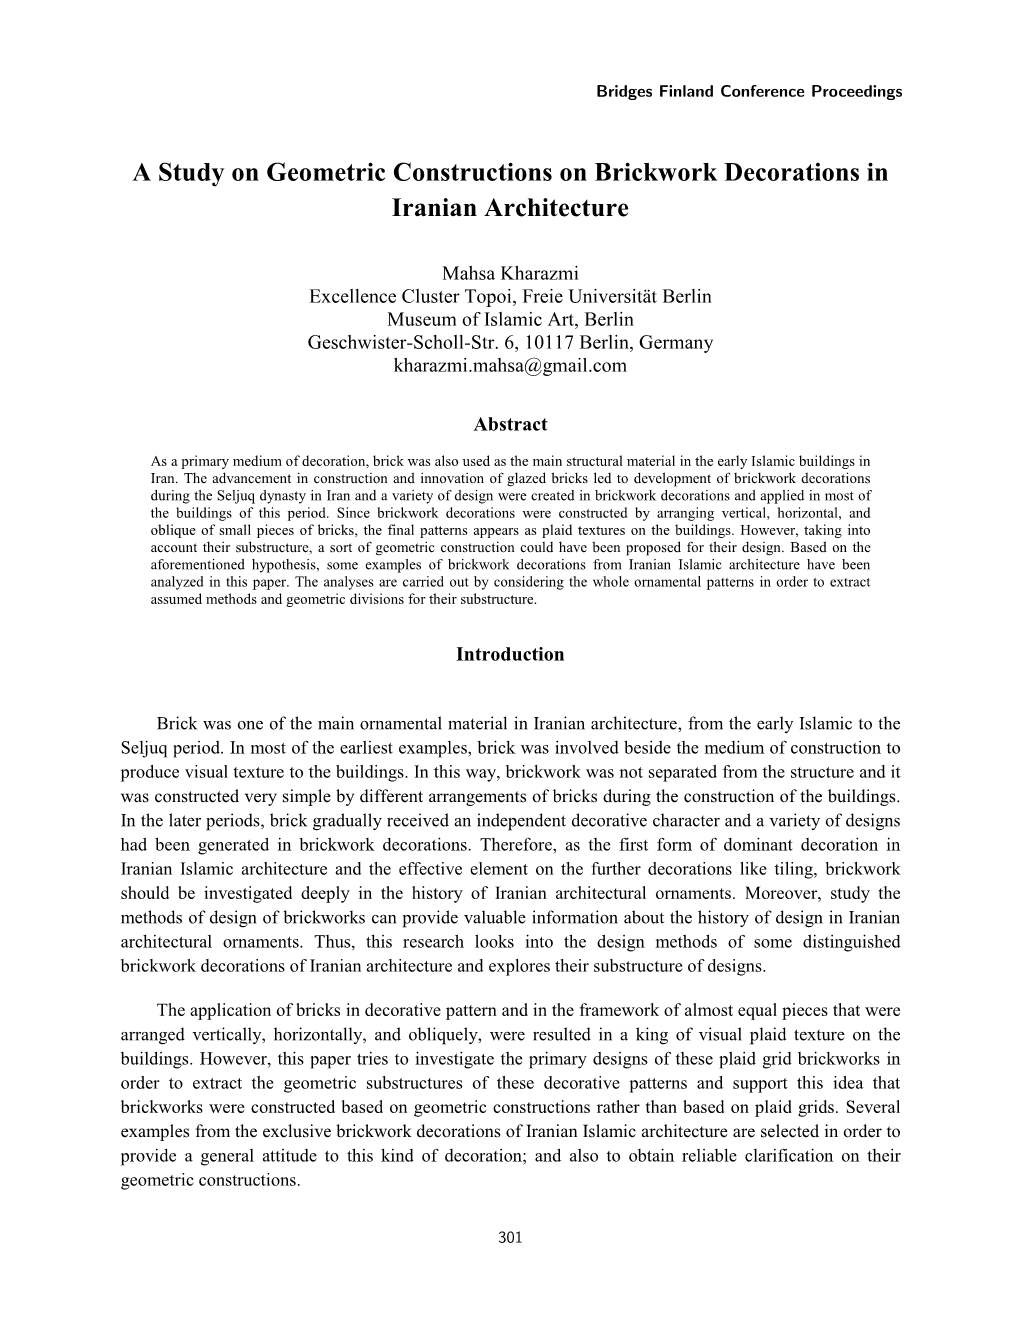 A Study on Geometric Constructions on Brickwork Decorations in Iranian Architecture